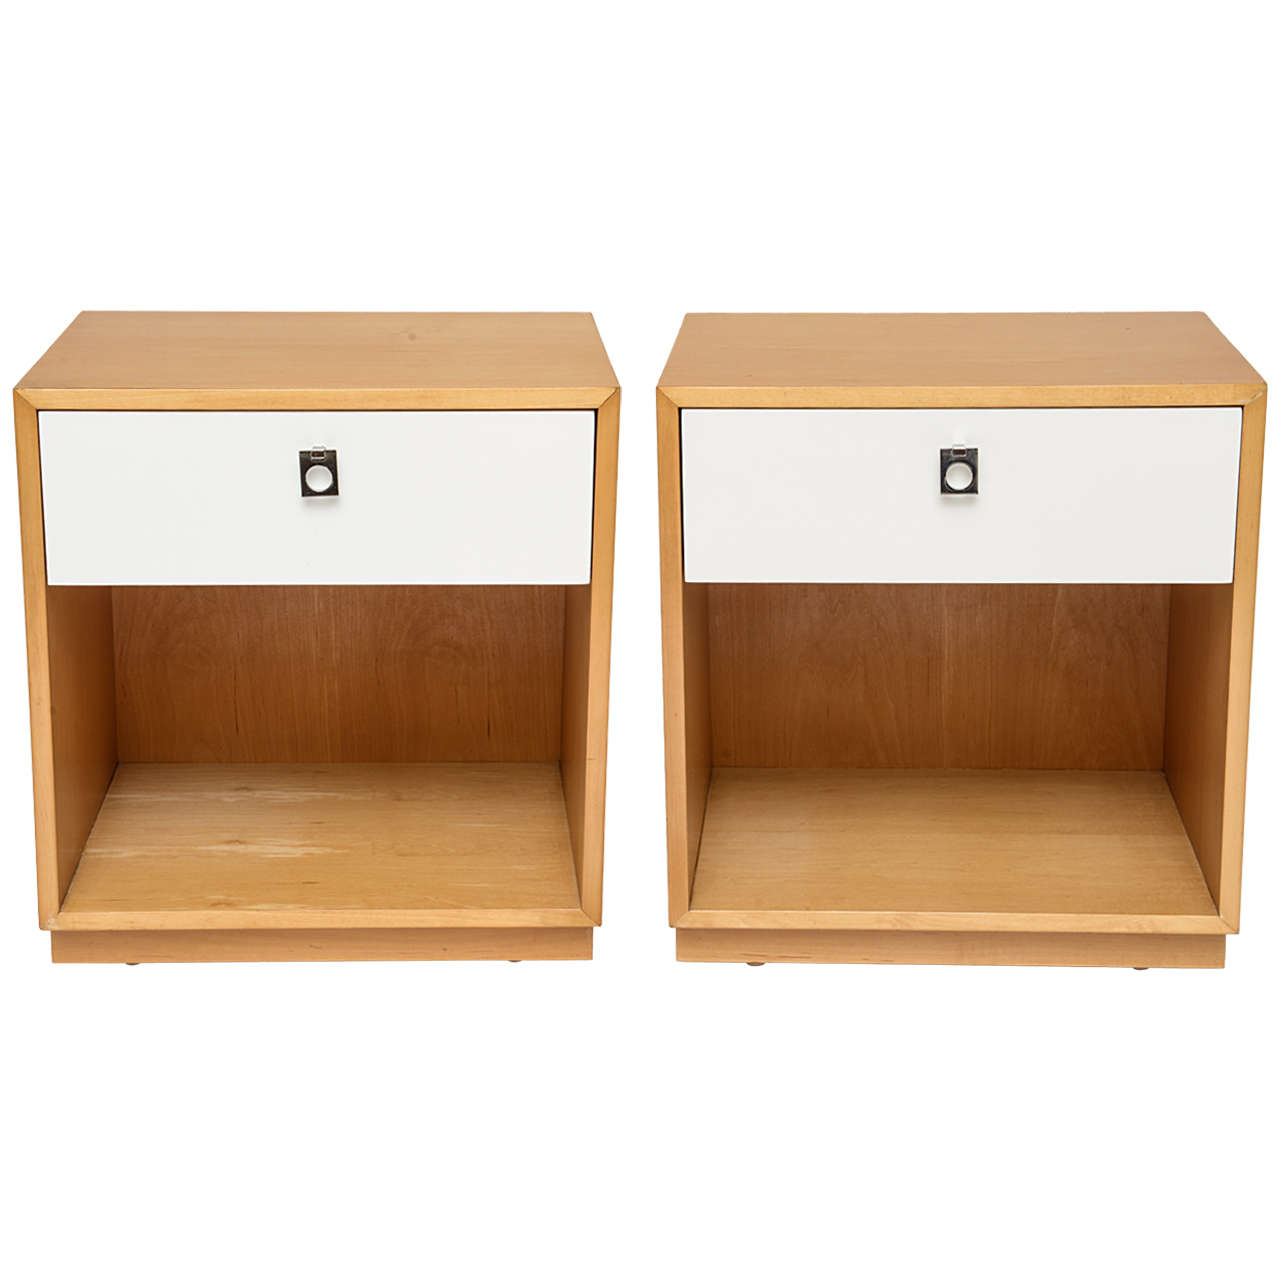 Jack Cartwright 60s Modern Nightstands for Founders Furniture